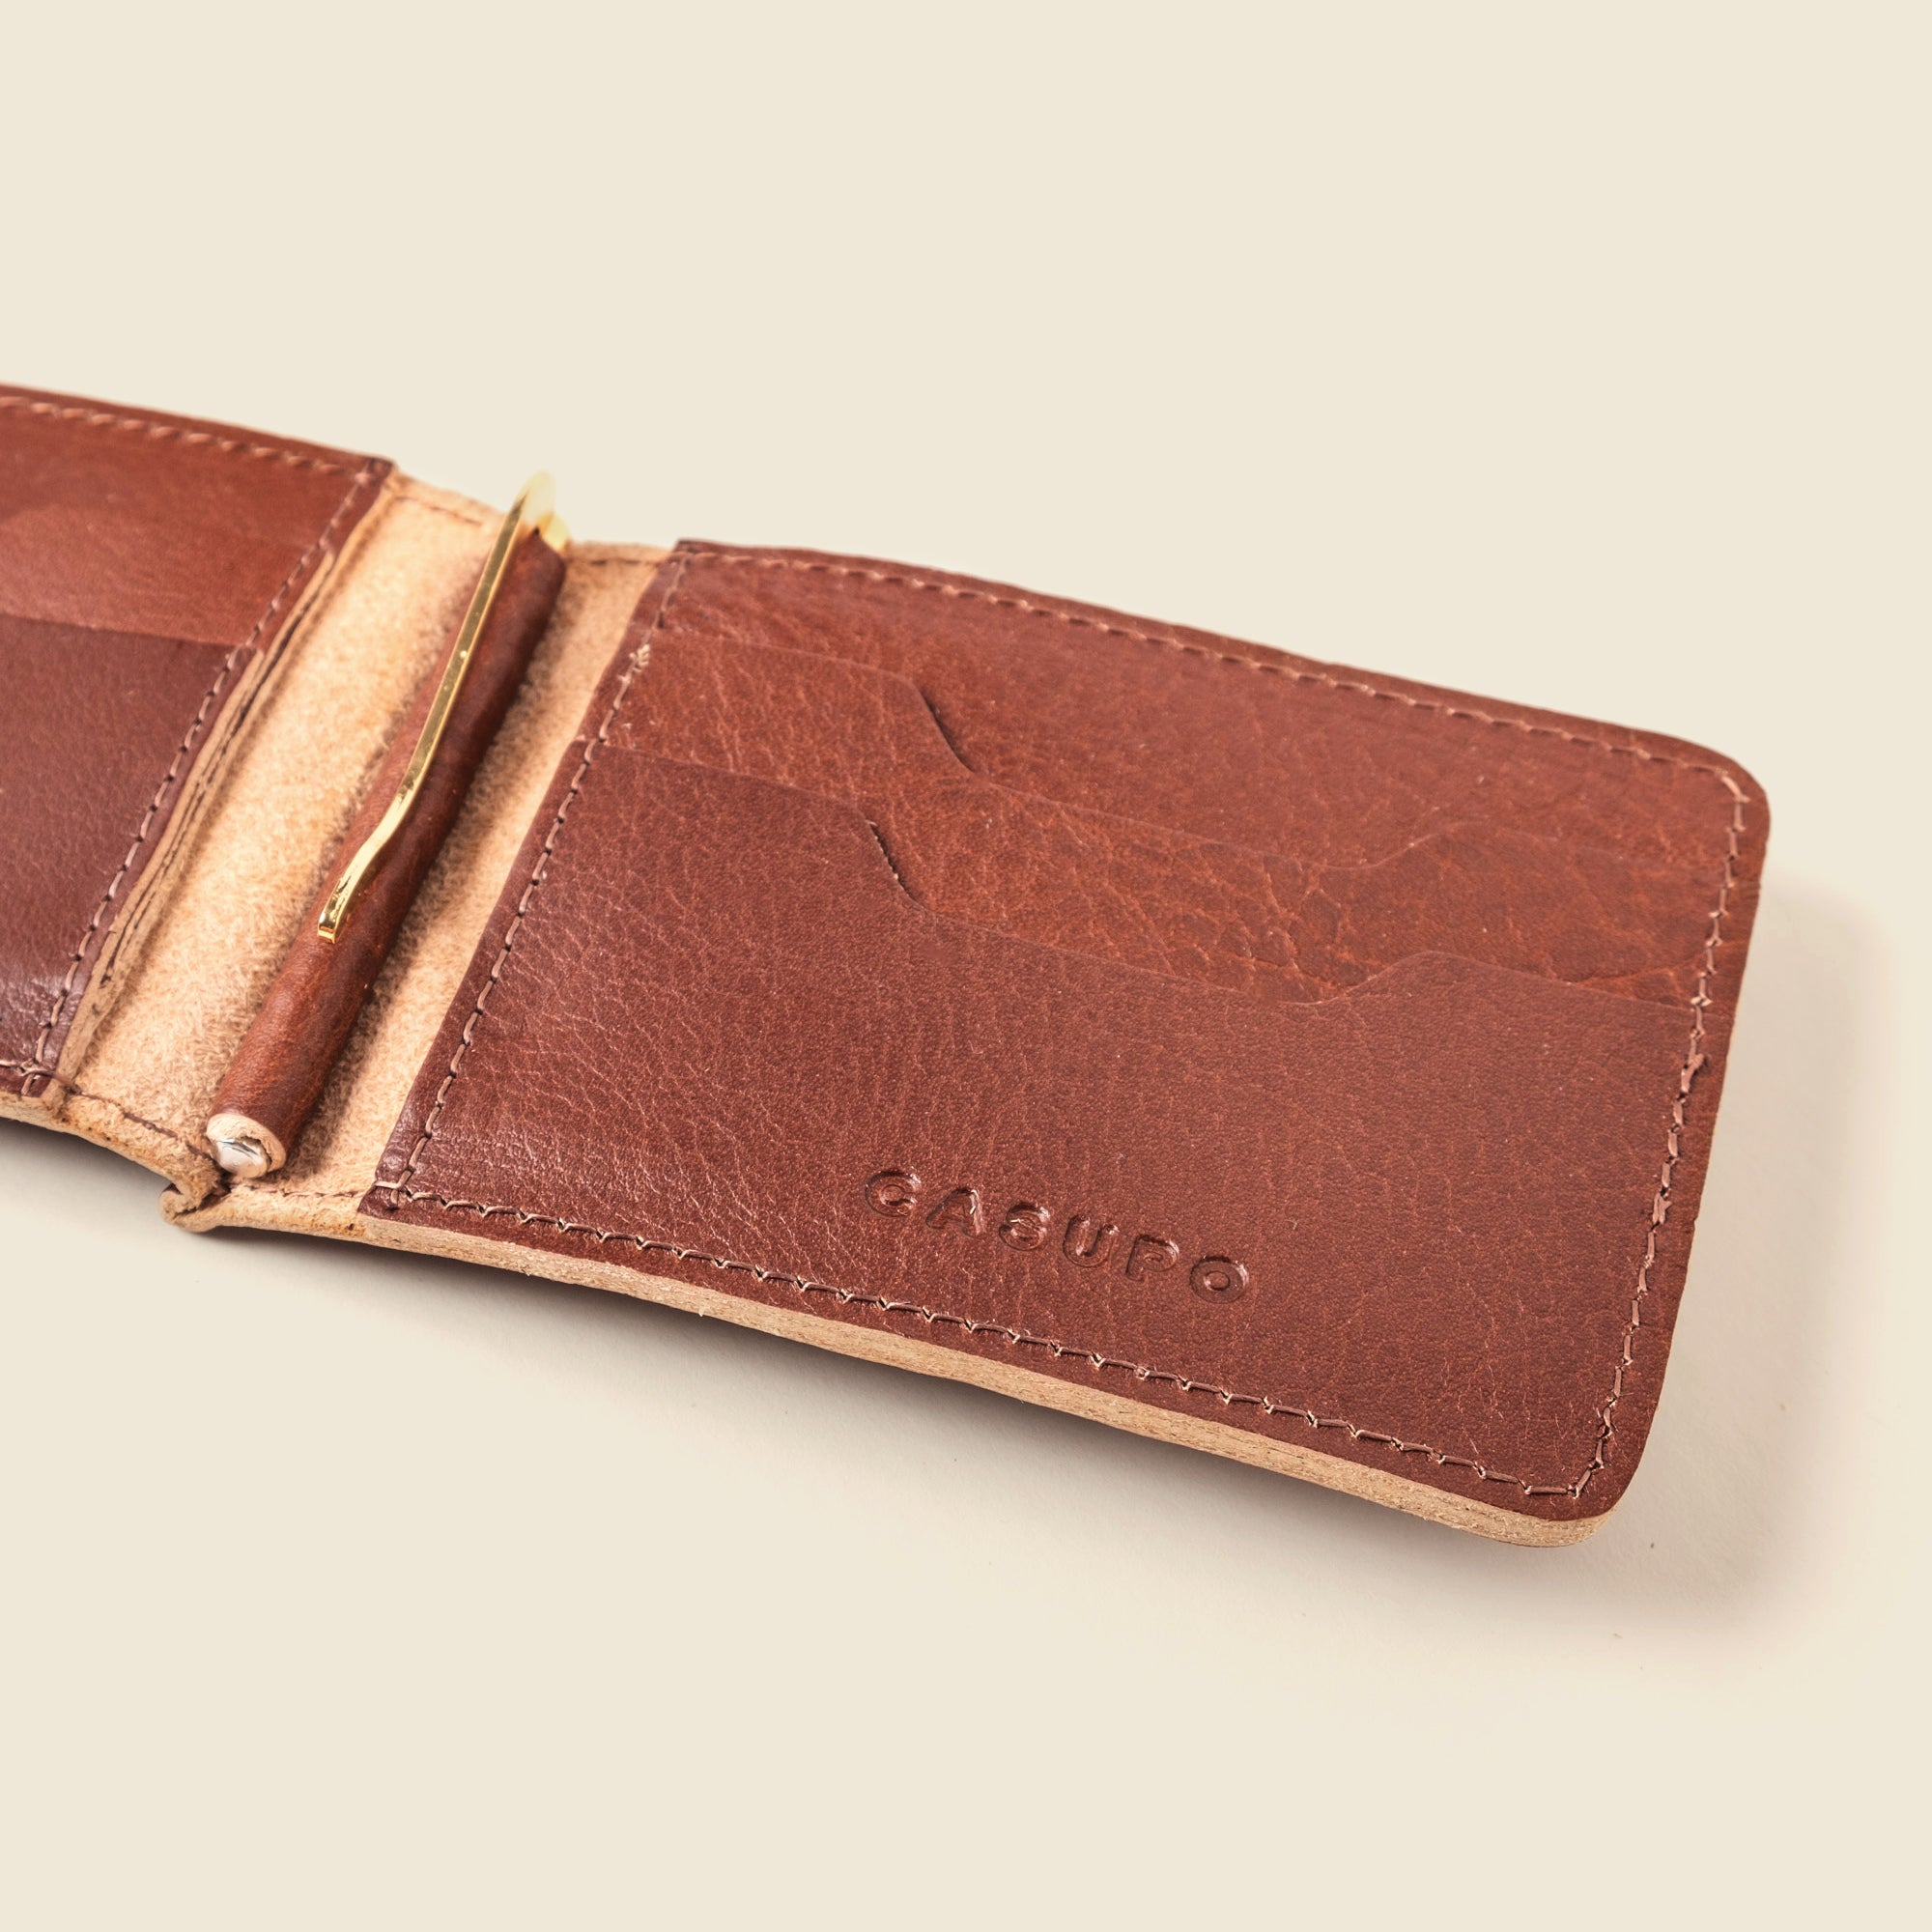 Brown Men's leather wallet with money clip